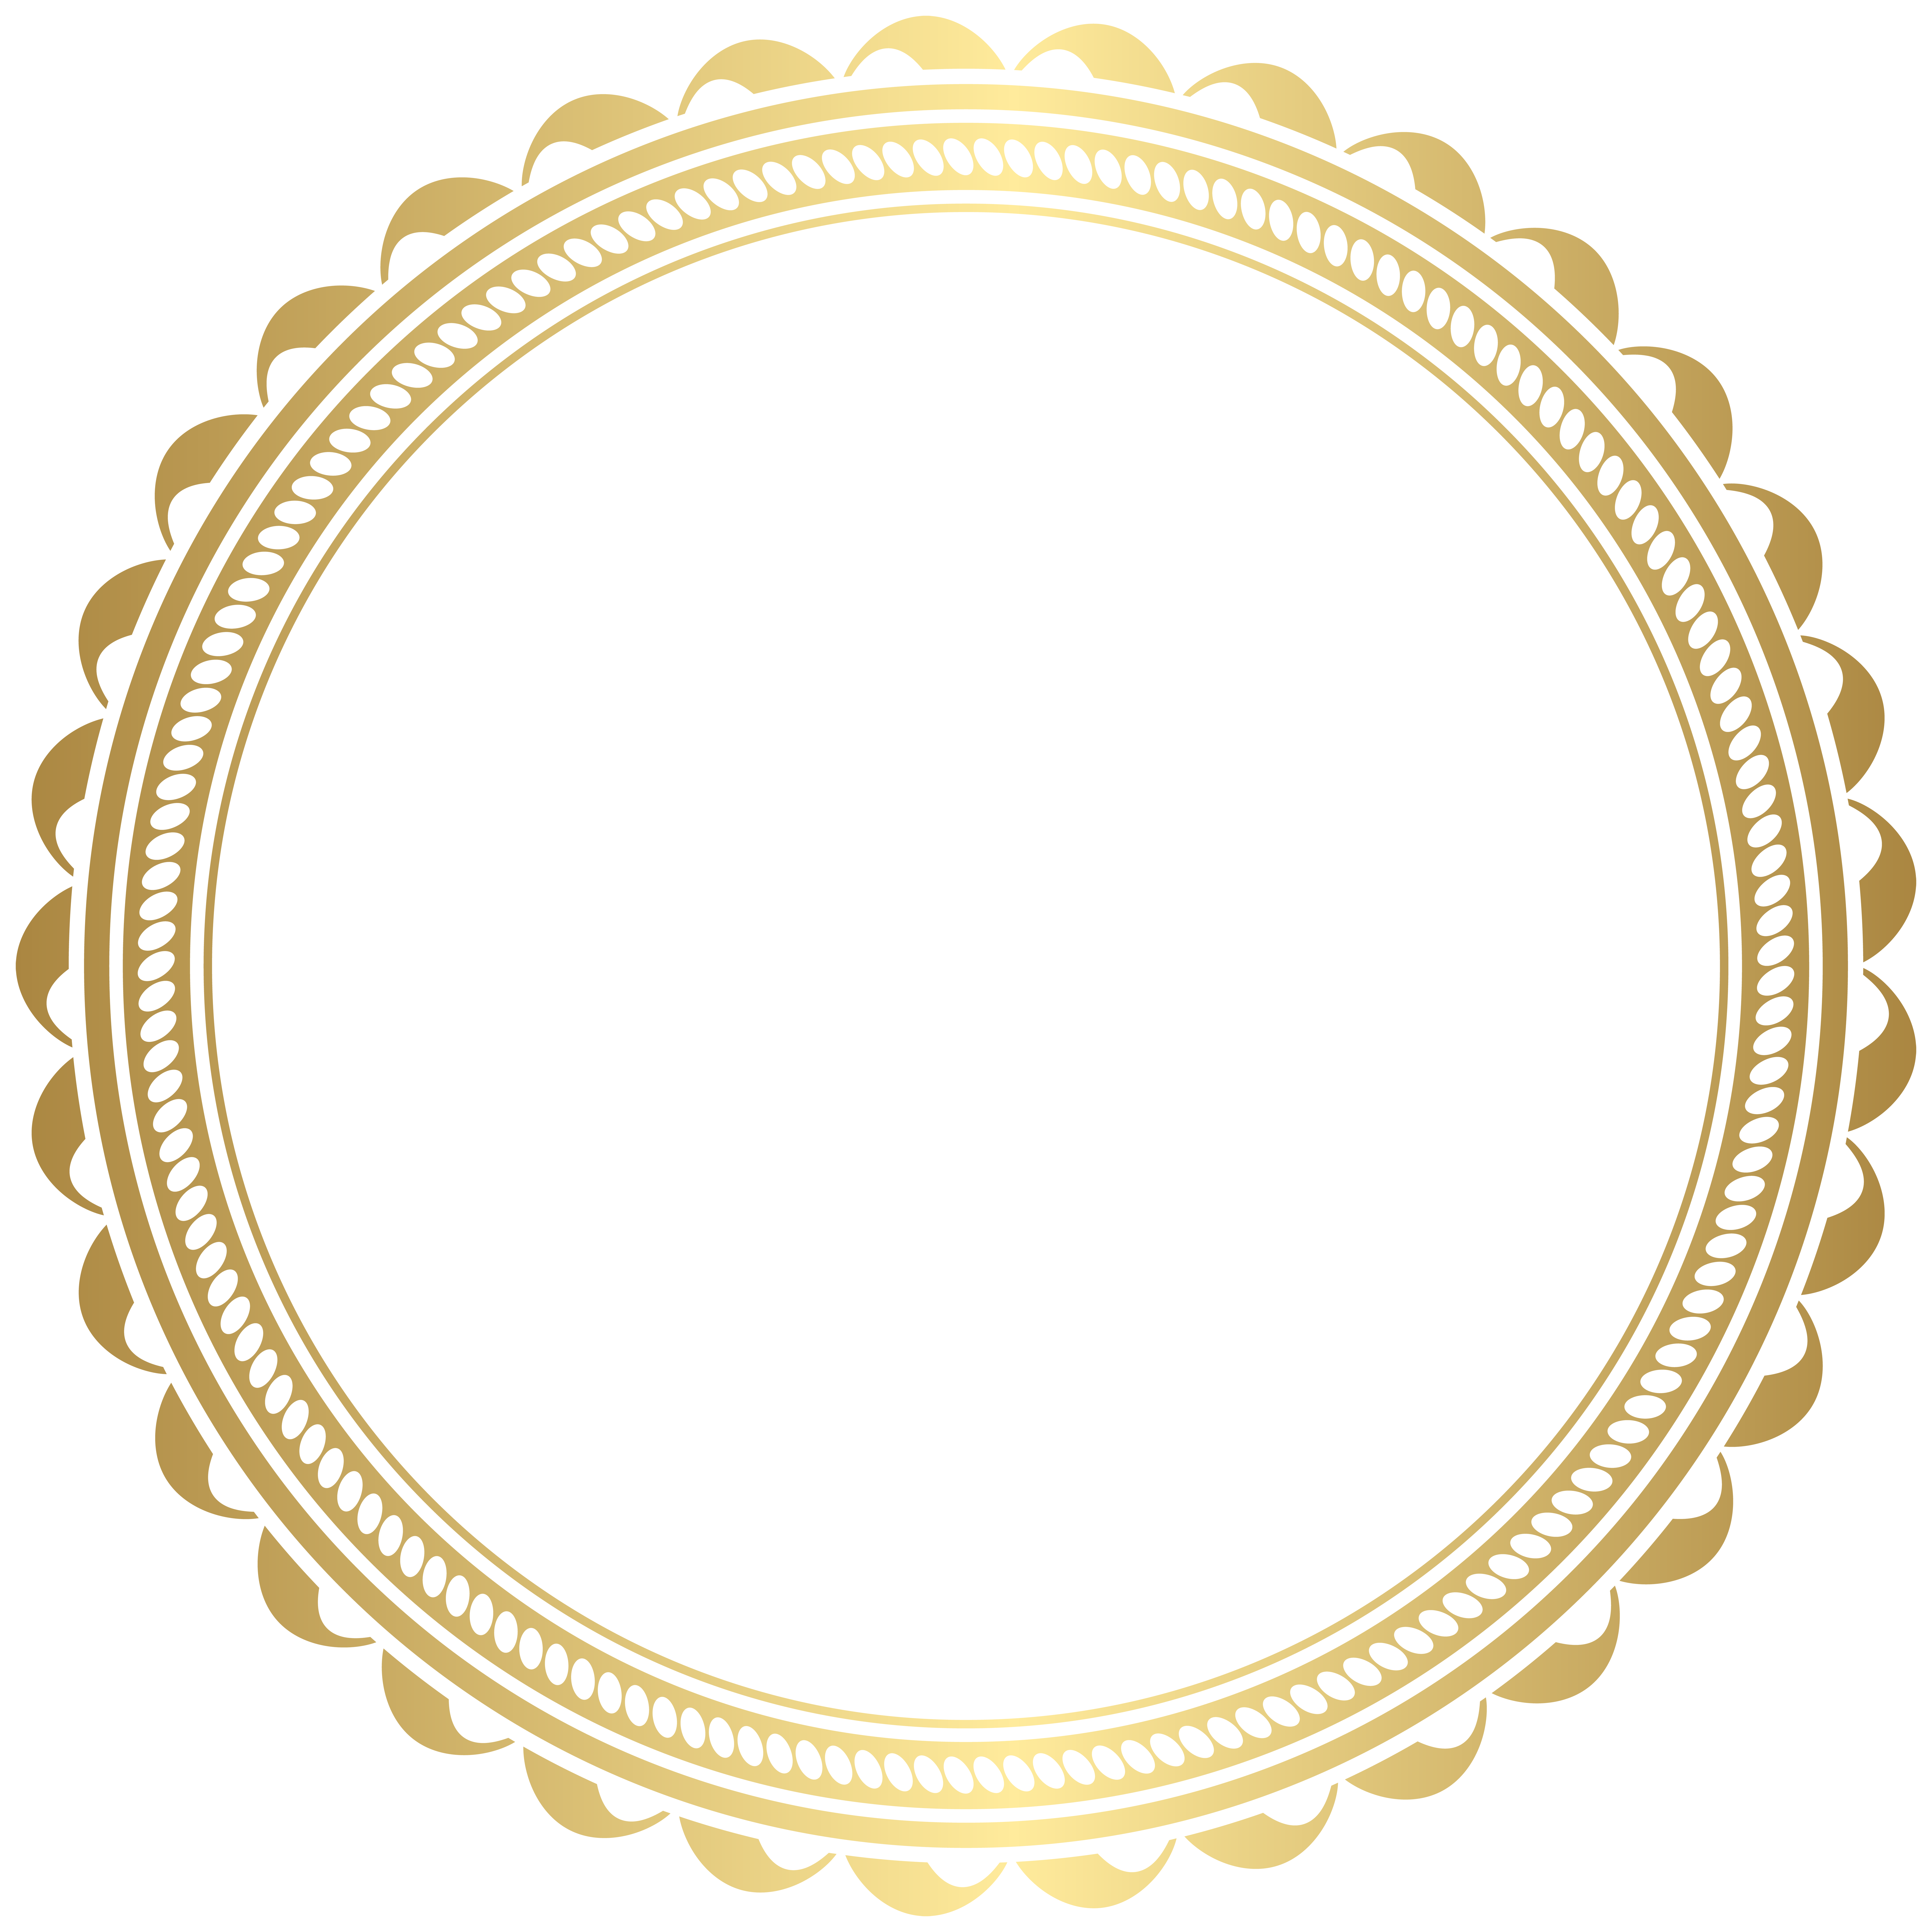 Round Frame PNG Transparent Images | PNG All